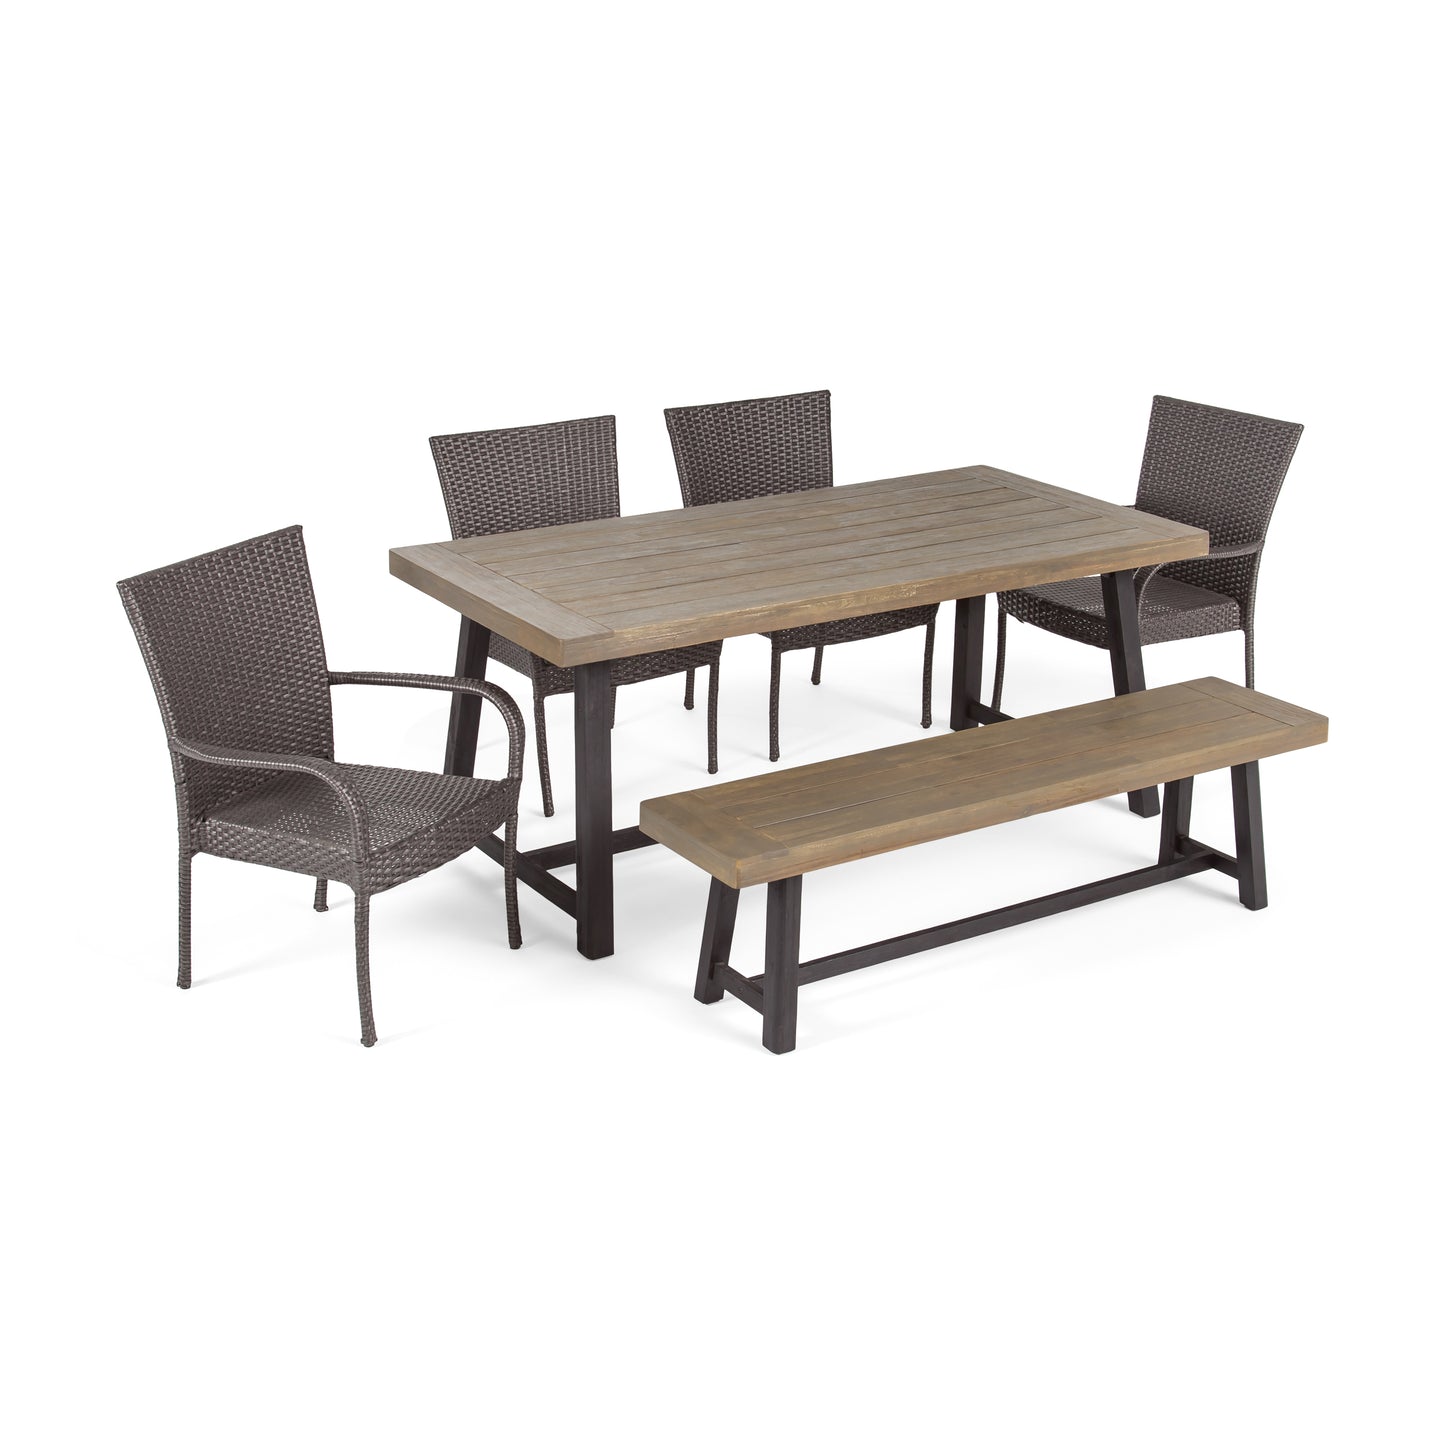 Jack Outdoor 6 Piece Dining Set with Stacking Wicker Chairs and Bench